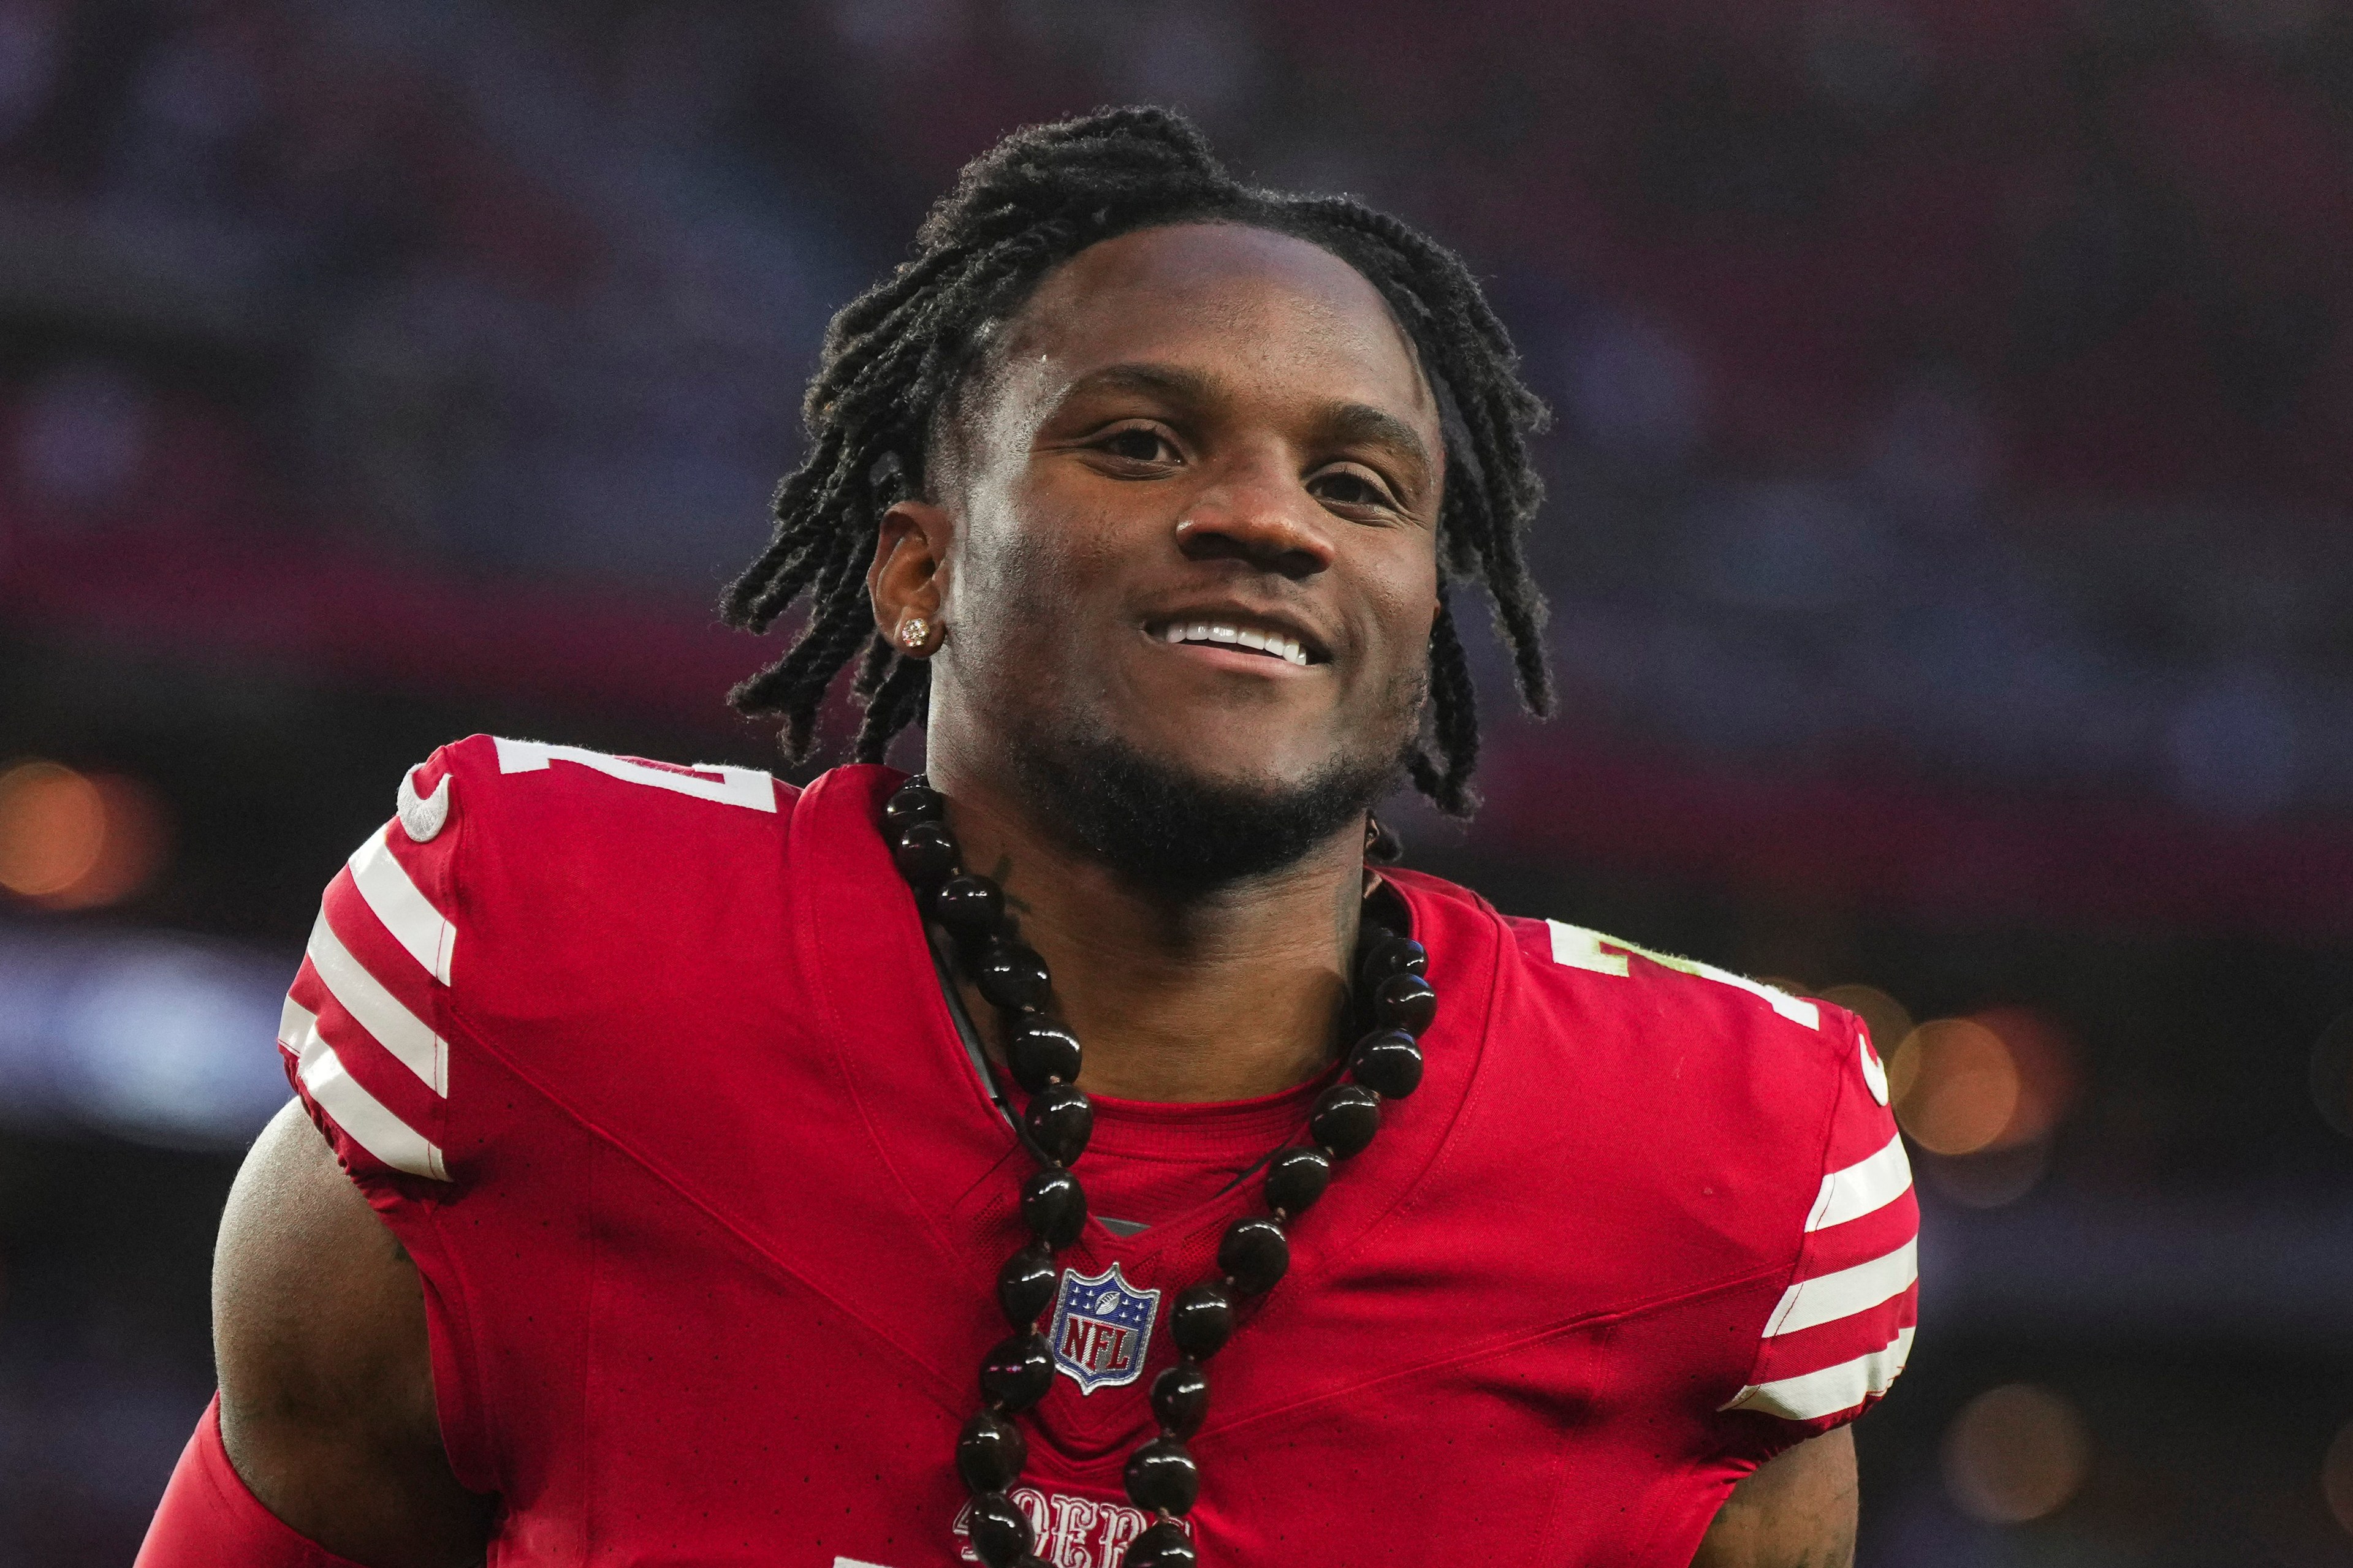 A smiling football player with dreadlocks in a red jersey adorned with a large bead necklace.